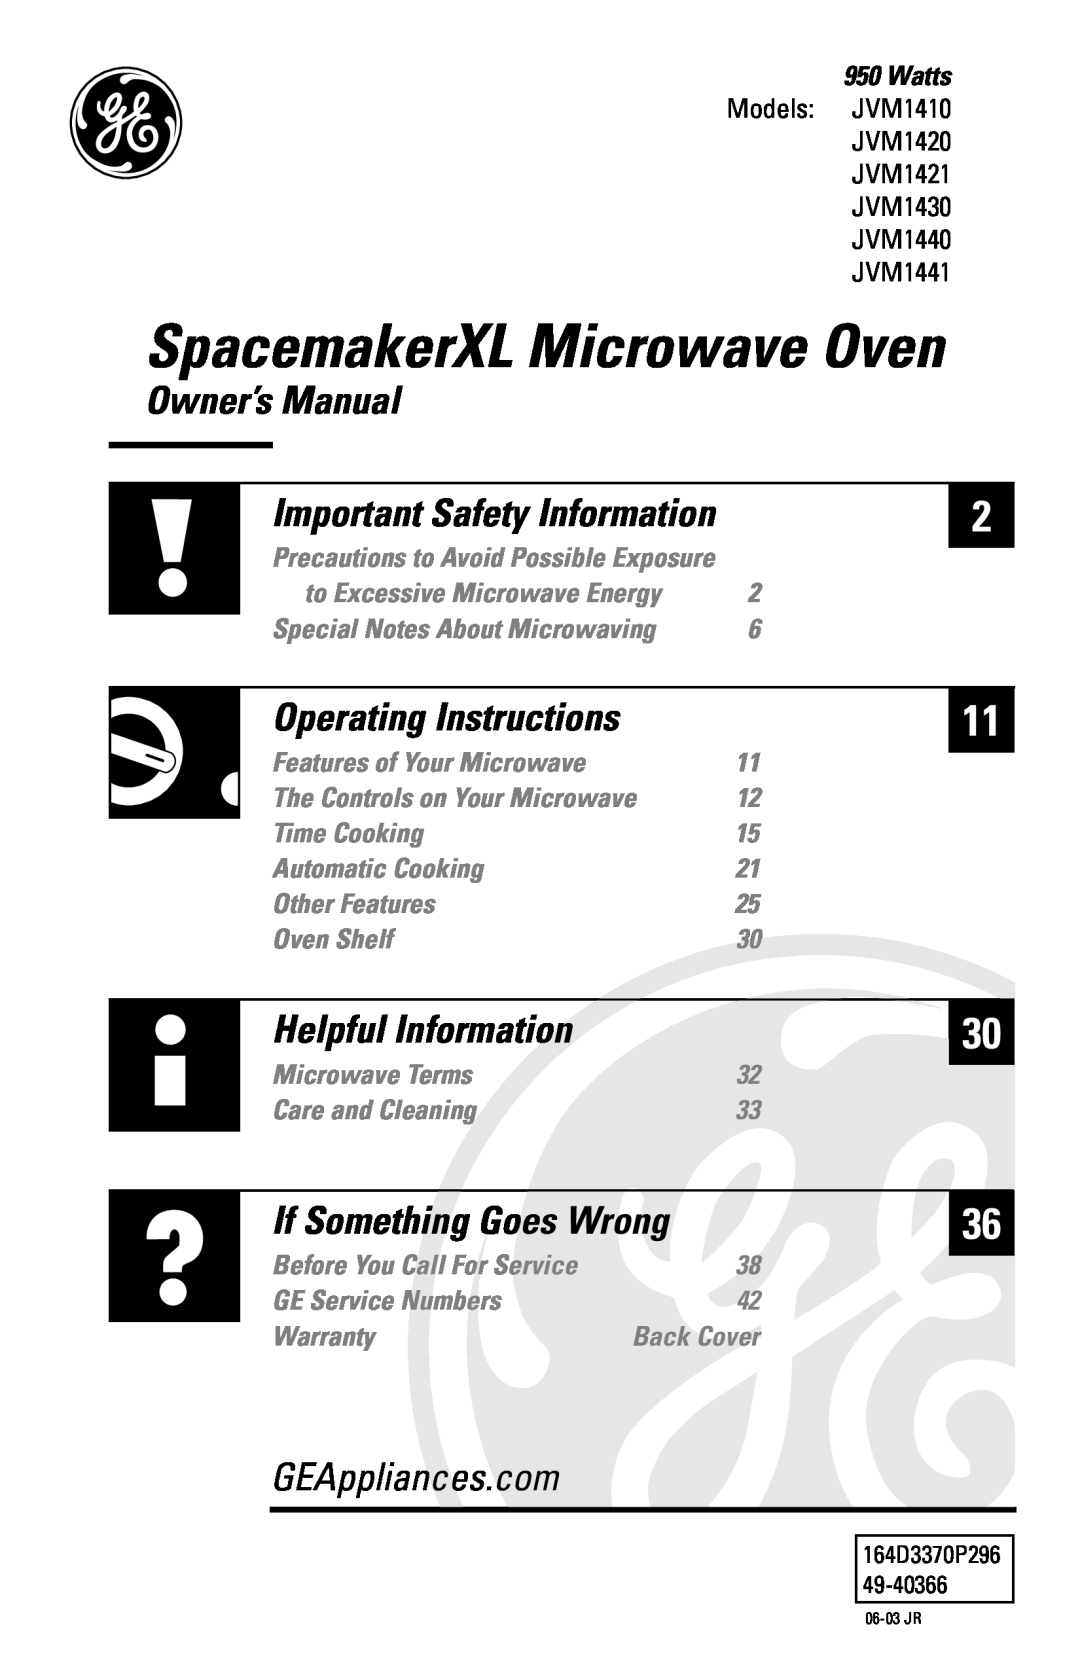 GE JVM142, JVM1410 owner manual Owner’s Manual, SpacemakerXL Microwave Oven, GEAppliances.com, Operating Instructions 